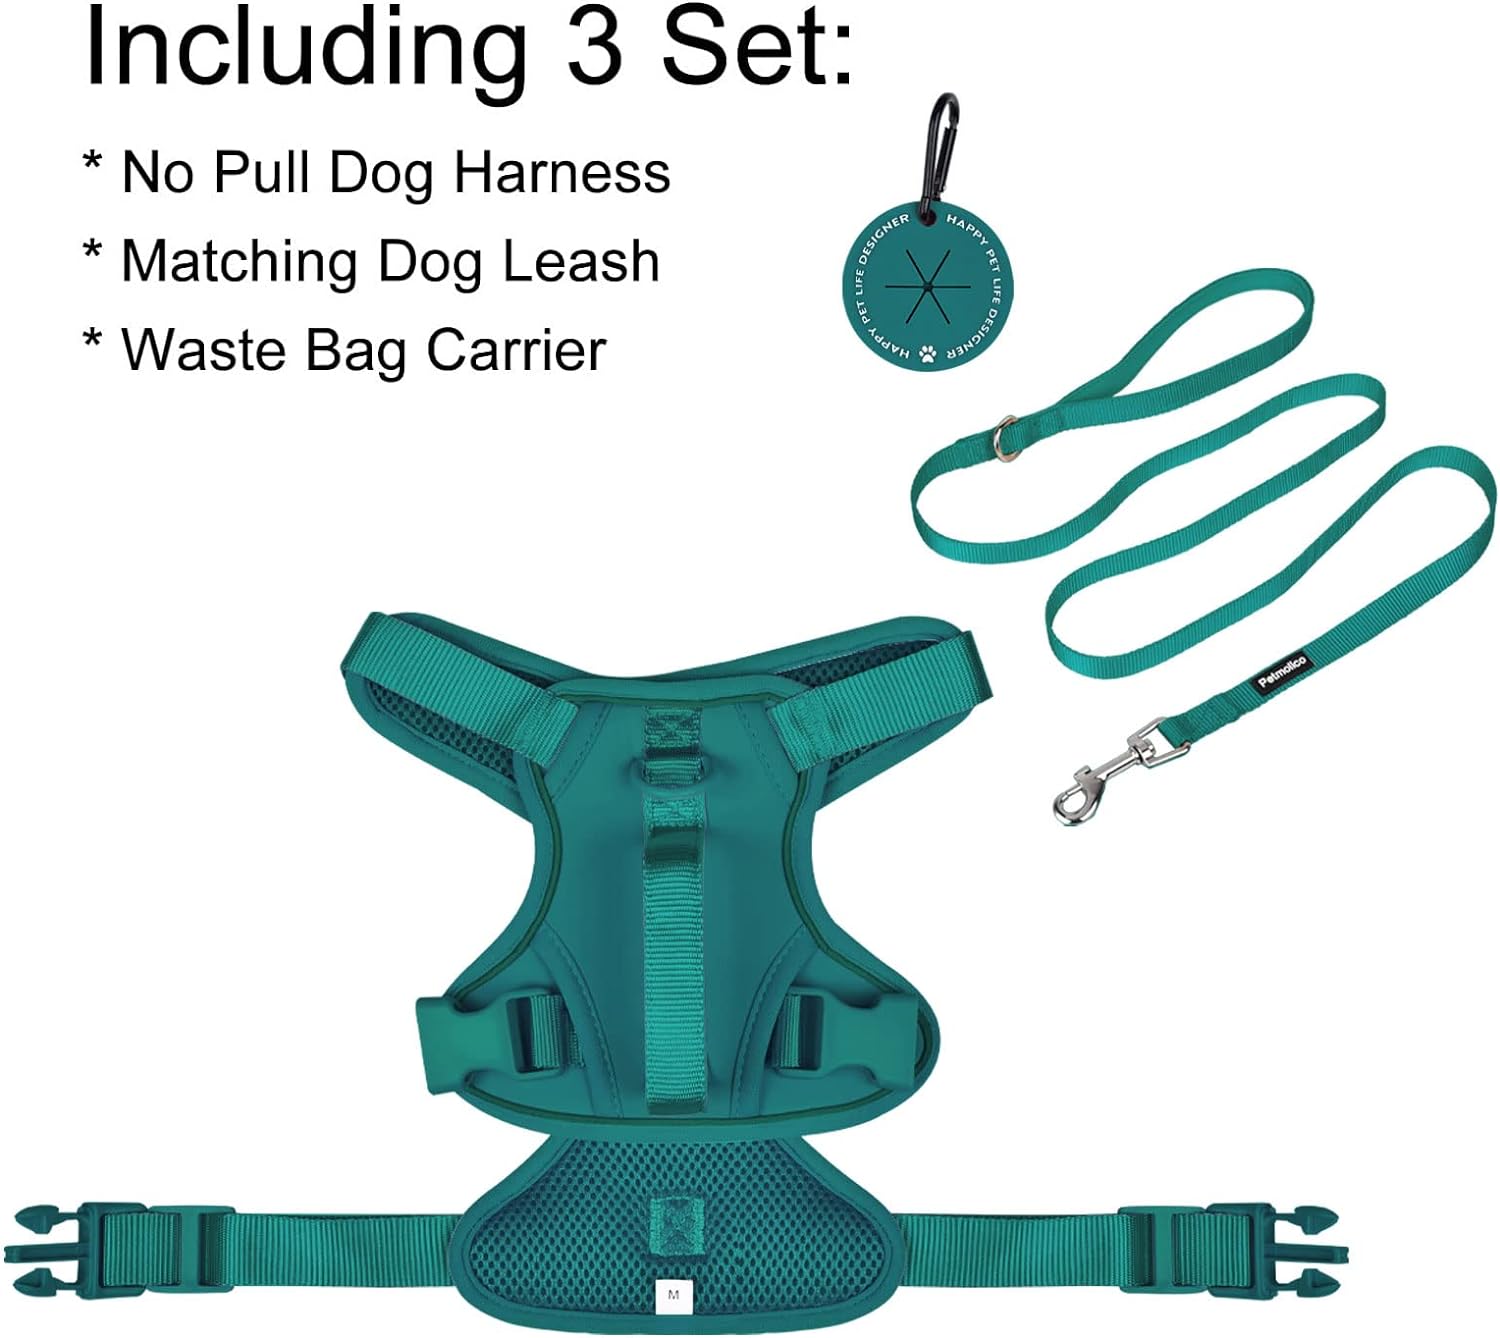 Petmolico Dog Harness for XS Dogs No Pull, Cute Dog Harness with Two Leash Clips and Soft Handle, Reflective Easy Walk Dog Harness with Leash, Pink XS